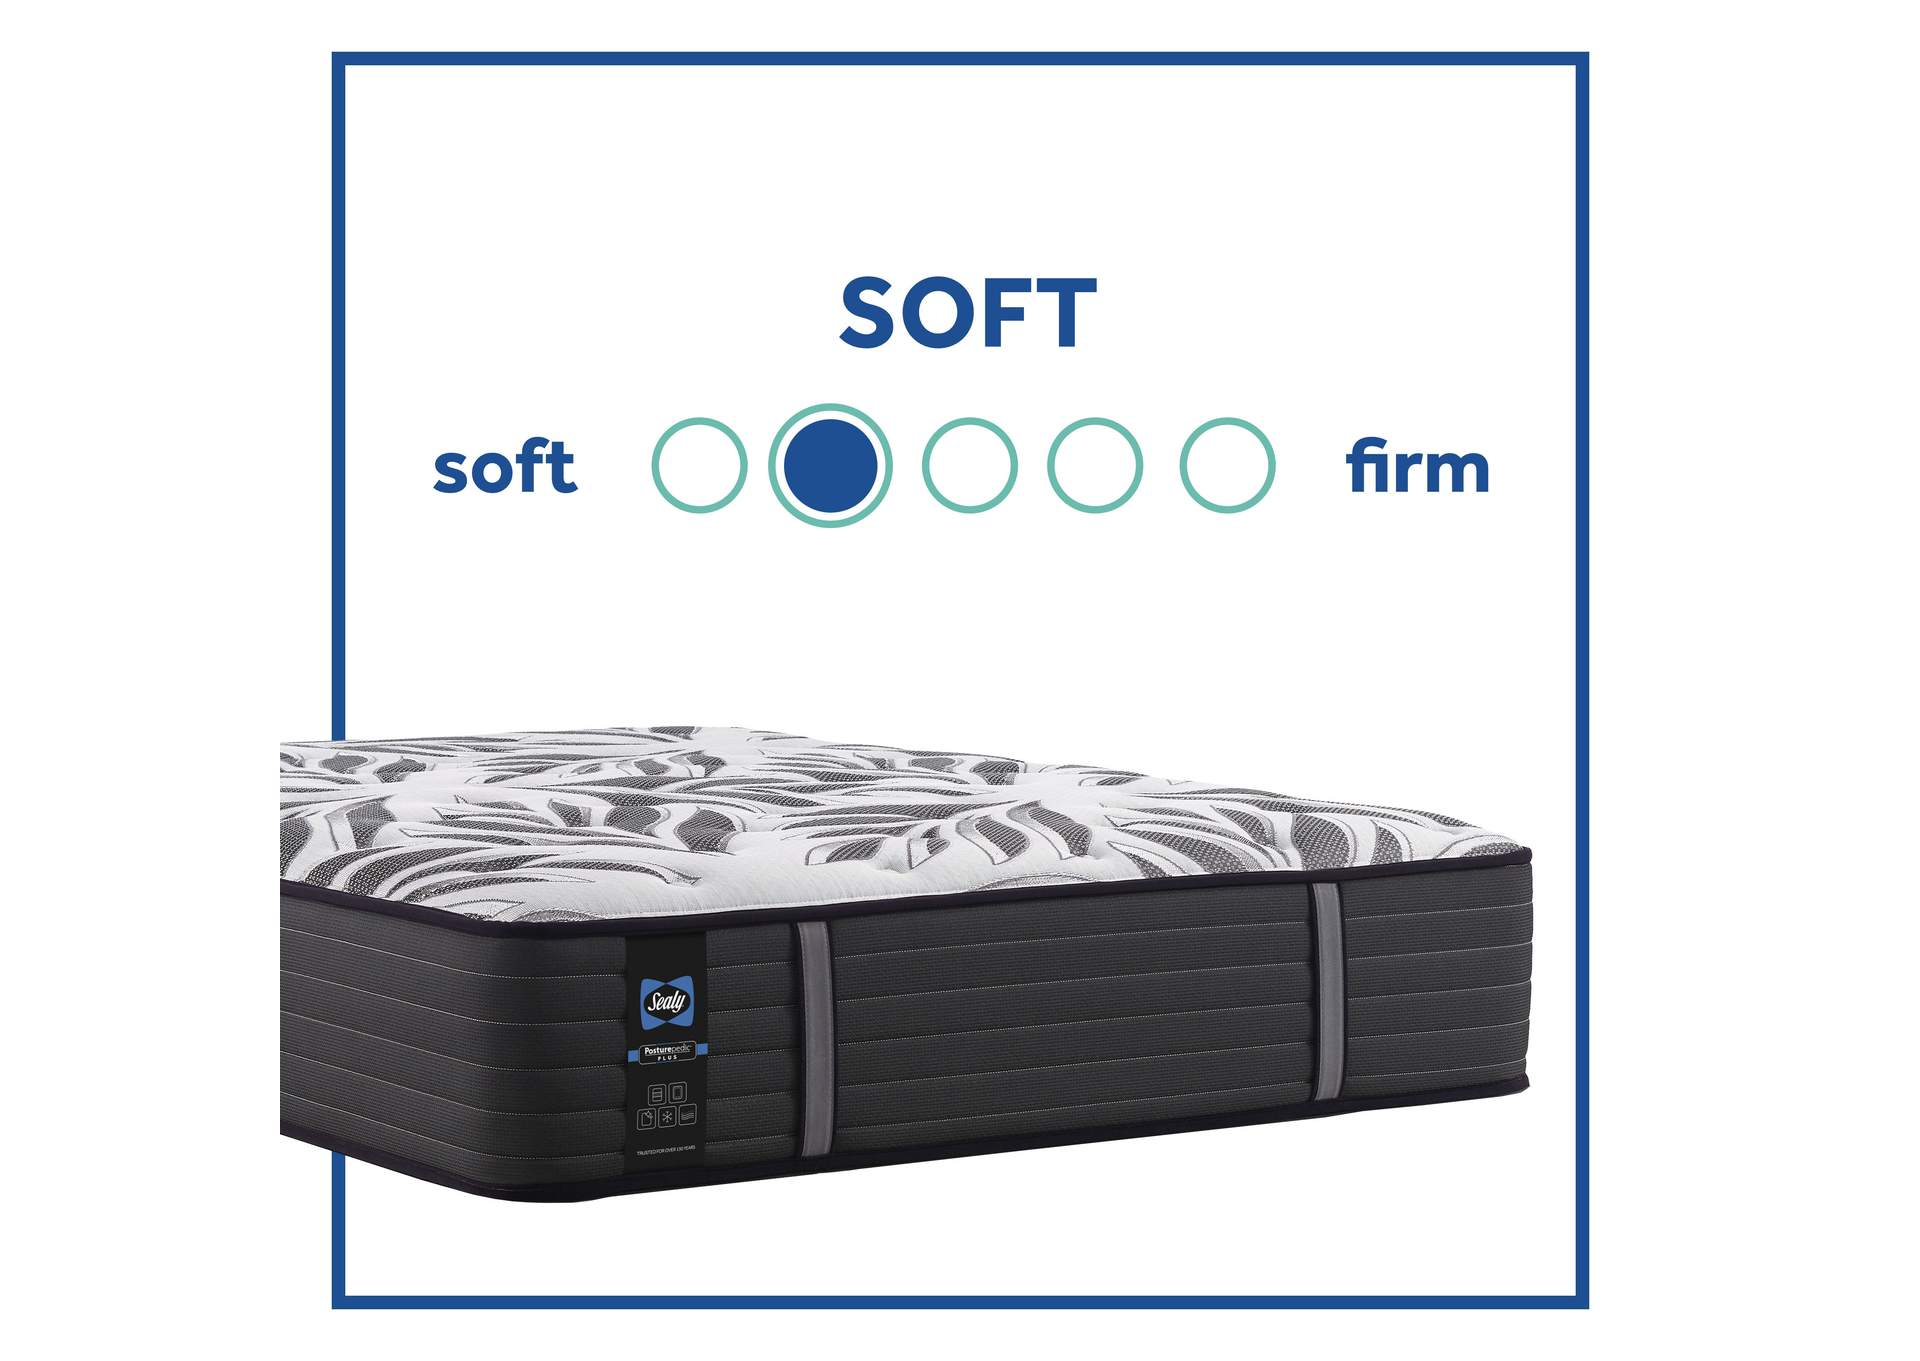 Victorious Soft Tight Top Queen Mattress,Sealy